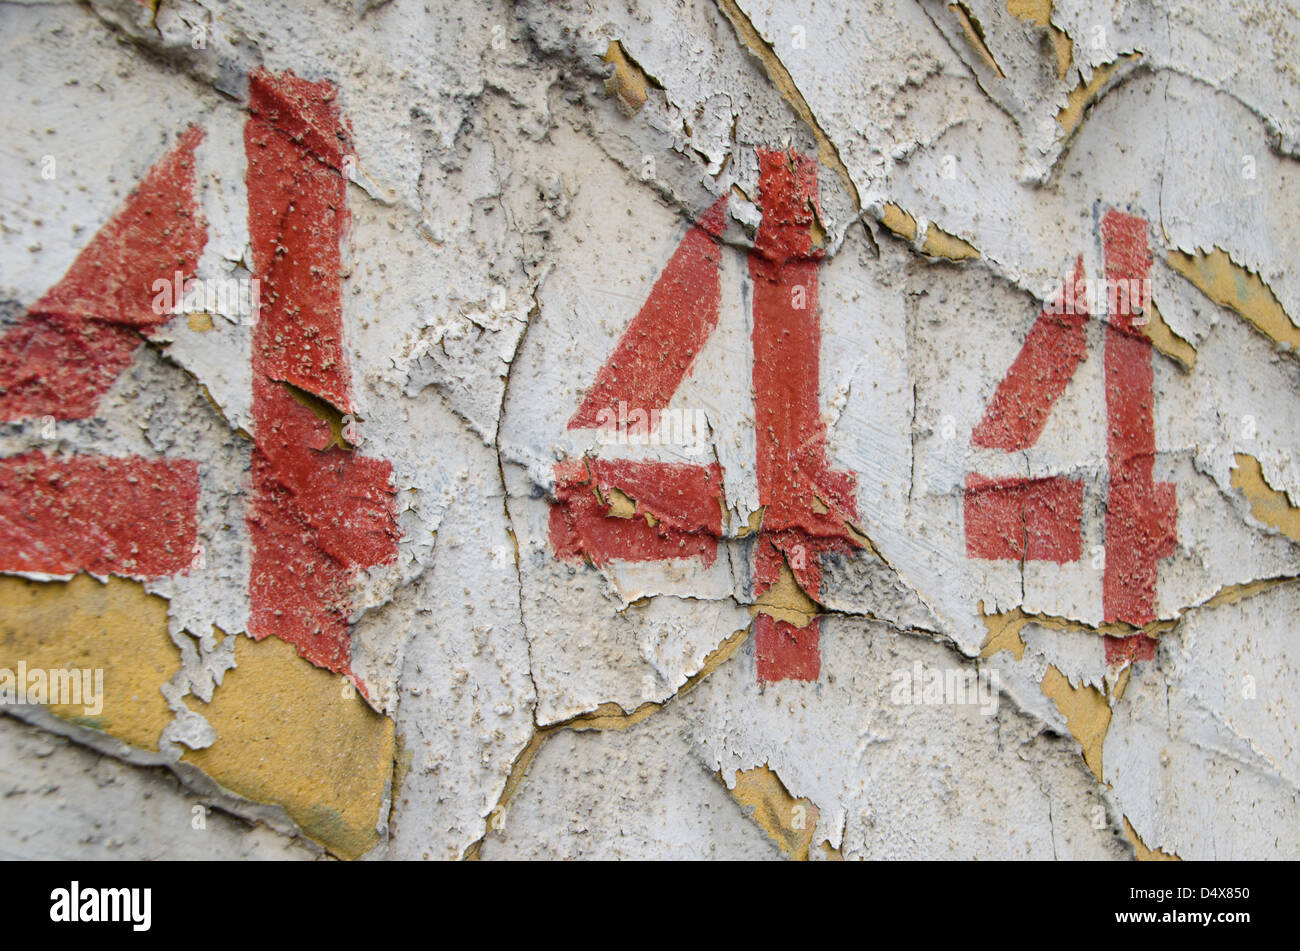 Abstract, gritty, urban background texture featuring a stenciled, painted '444' on a peeling white cement wall in Pittsburgh Stock Photo